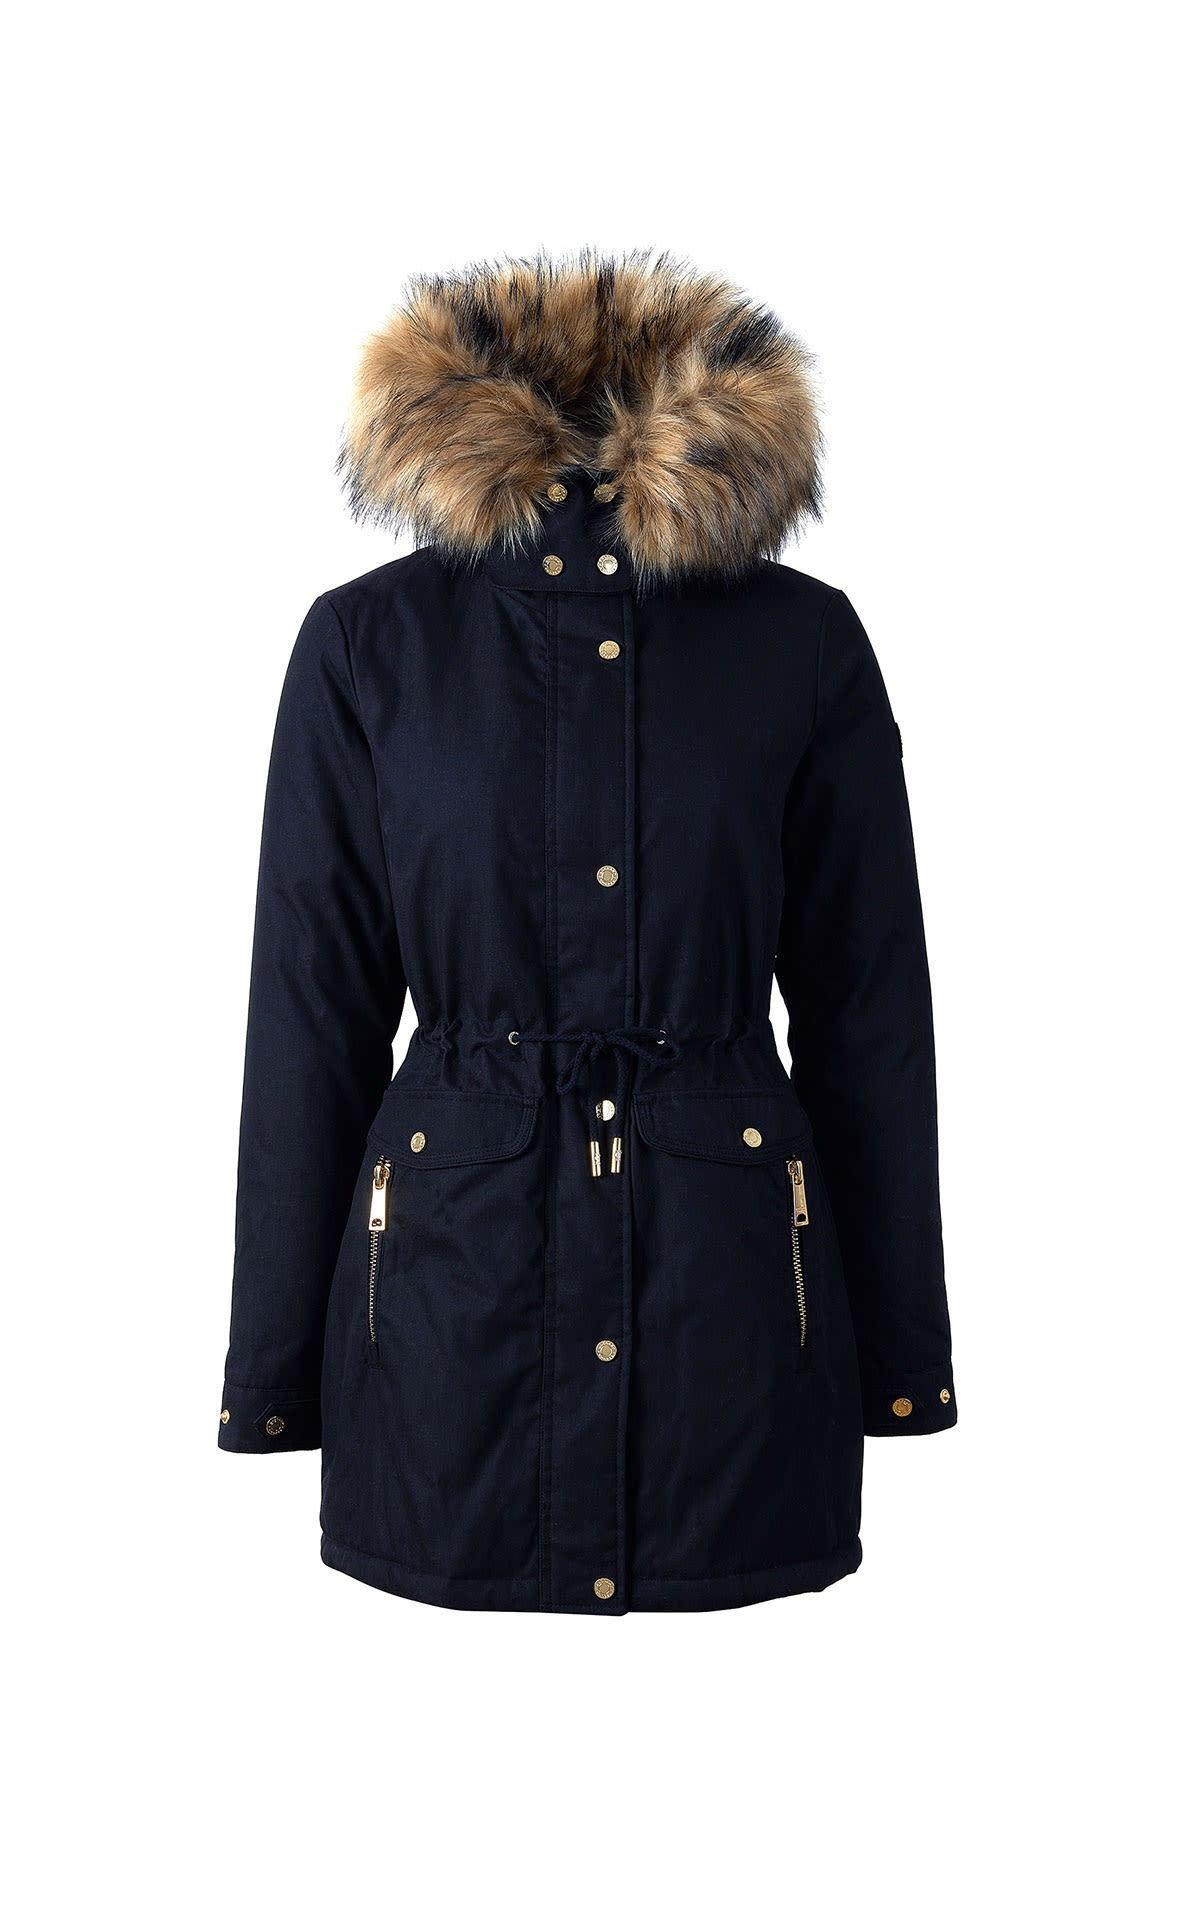 Holland Cooper Montana parka from Bicester Village